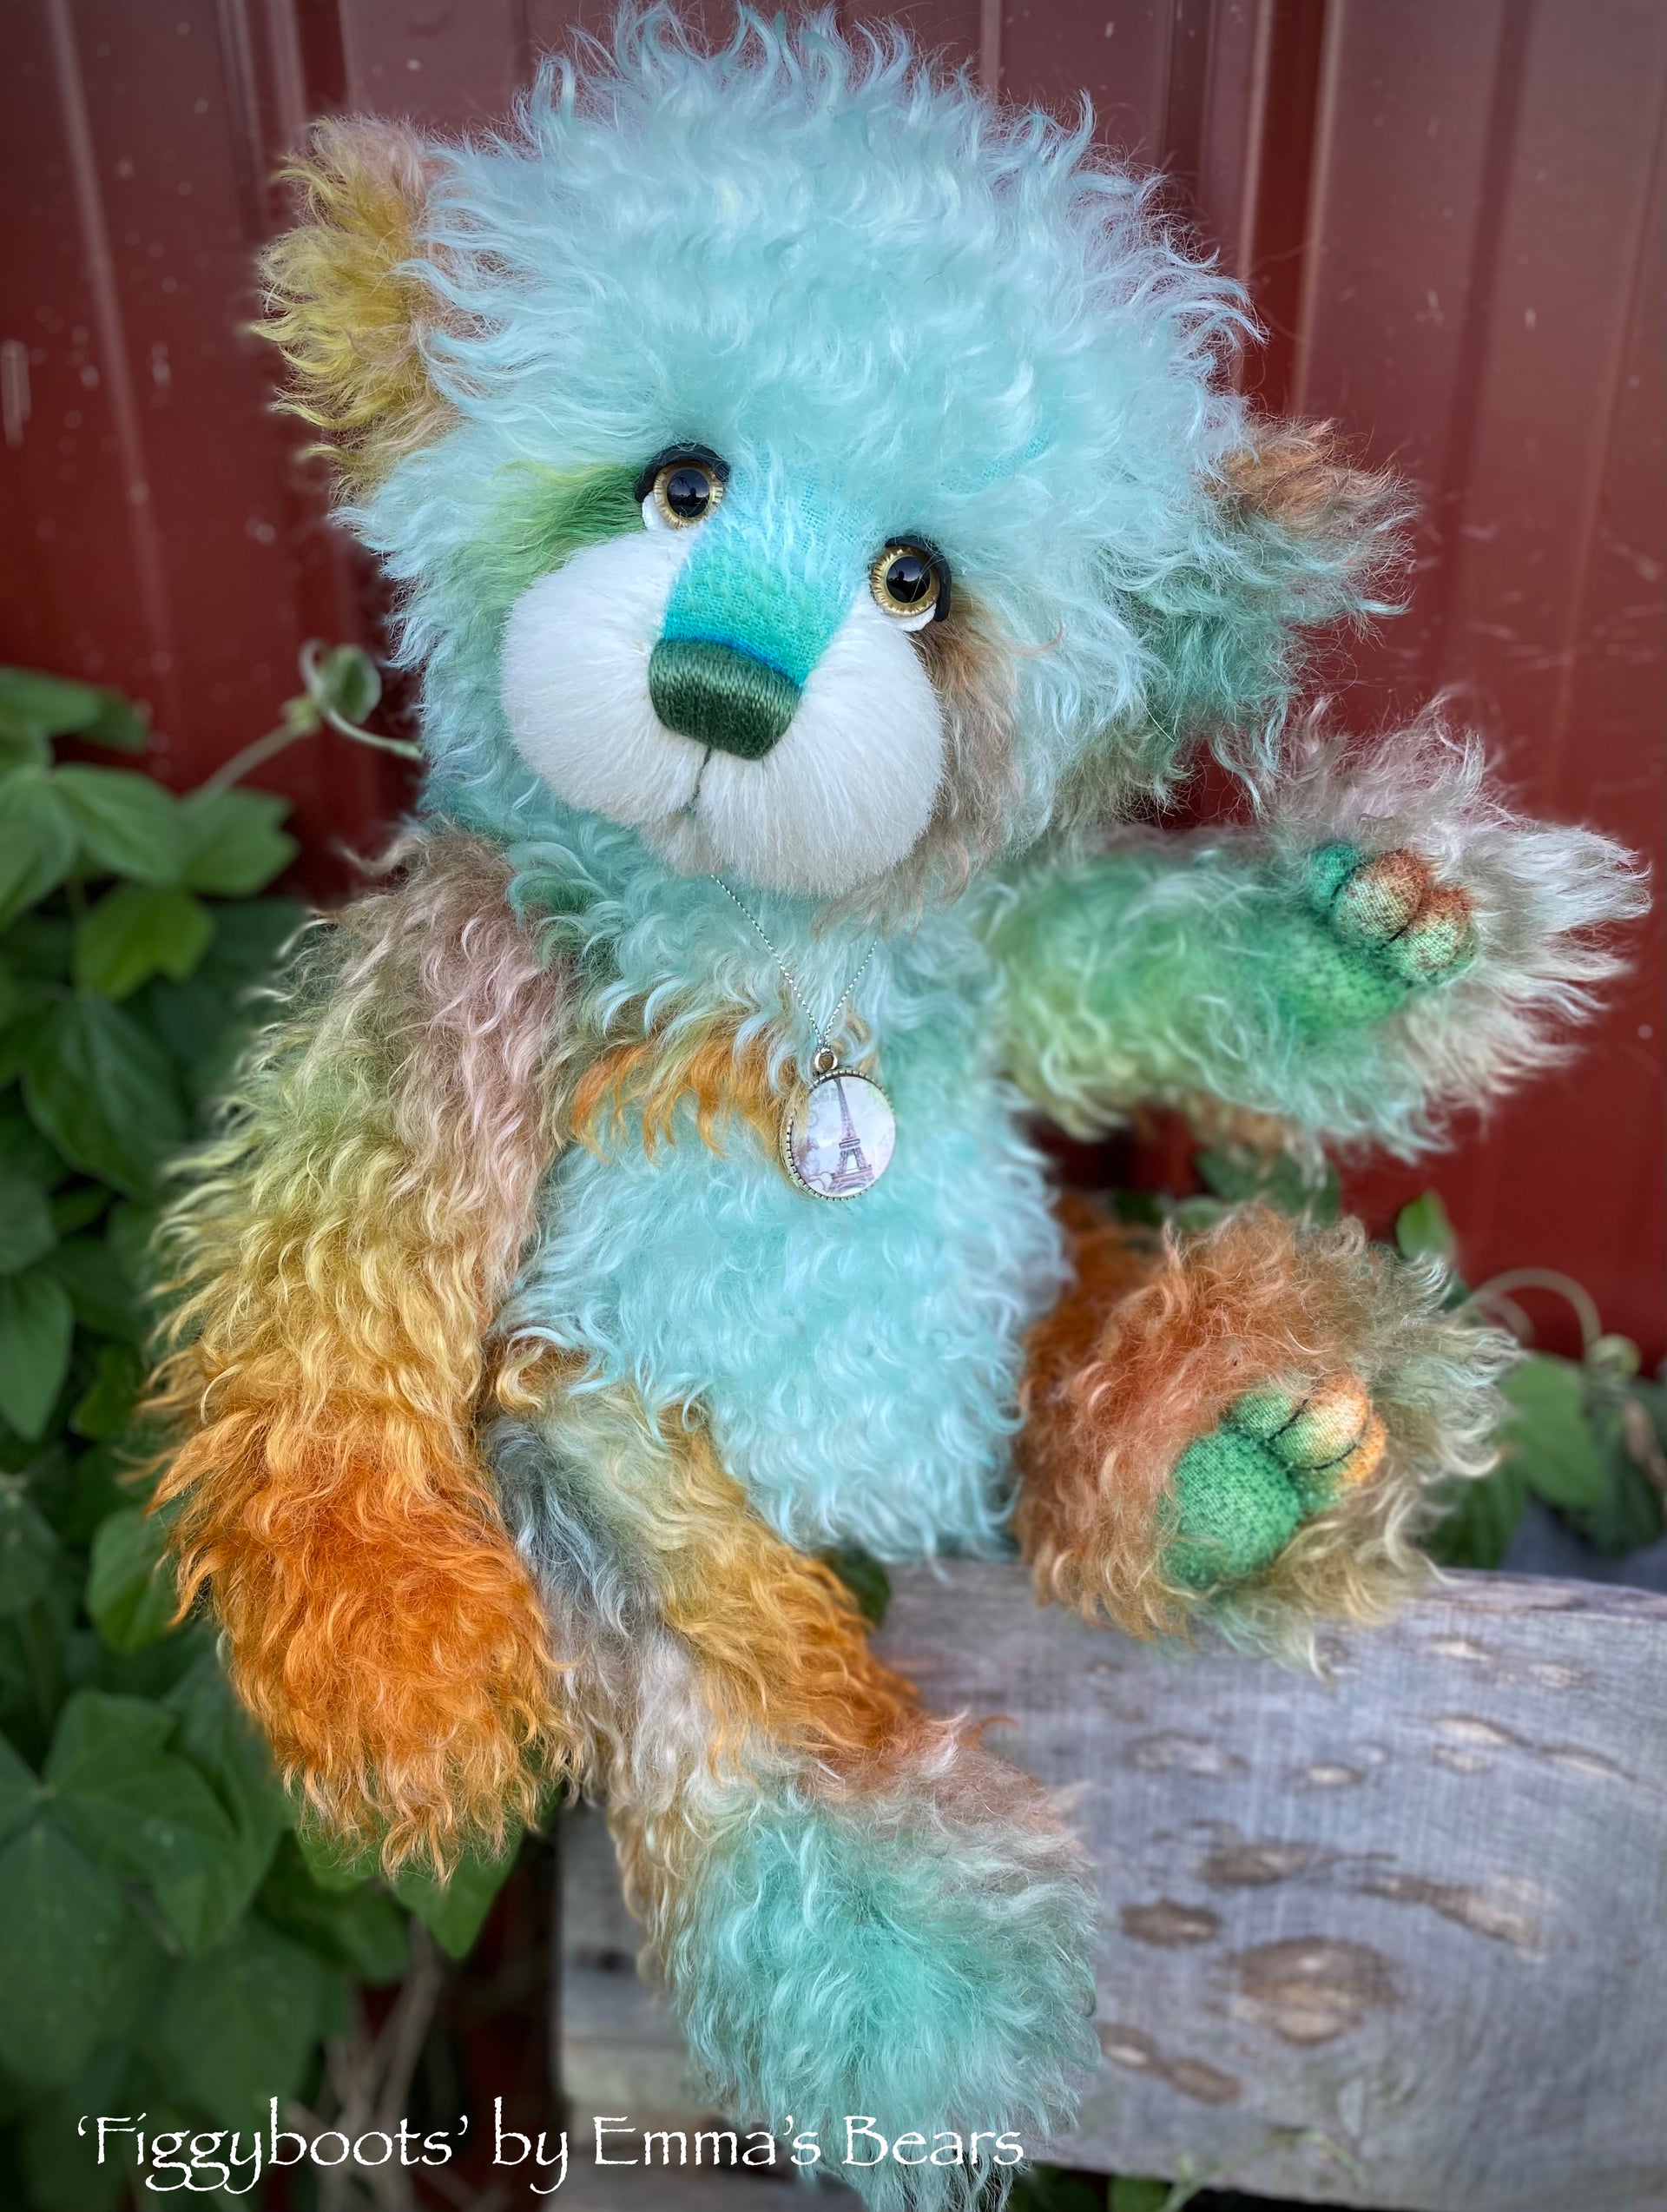 Figgyboots - 15" Hand-Dyed Curlylocks Mohair Artist Bear by Emma's Bears - OOAK